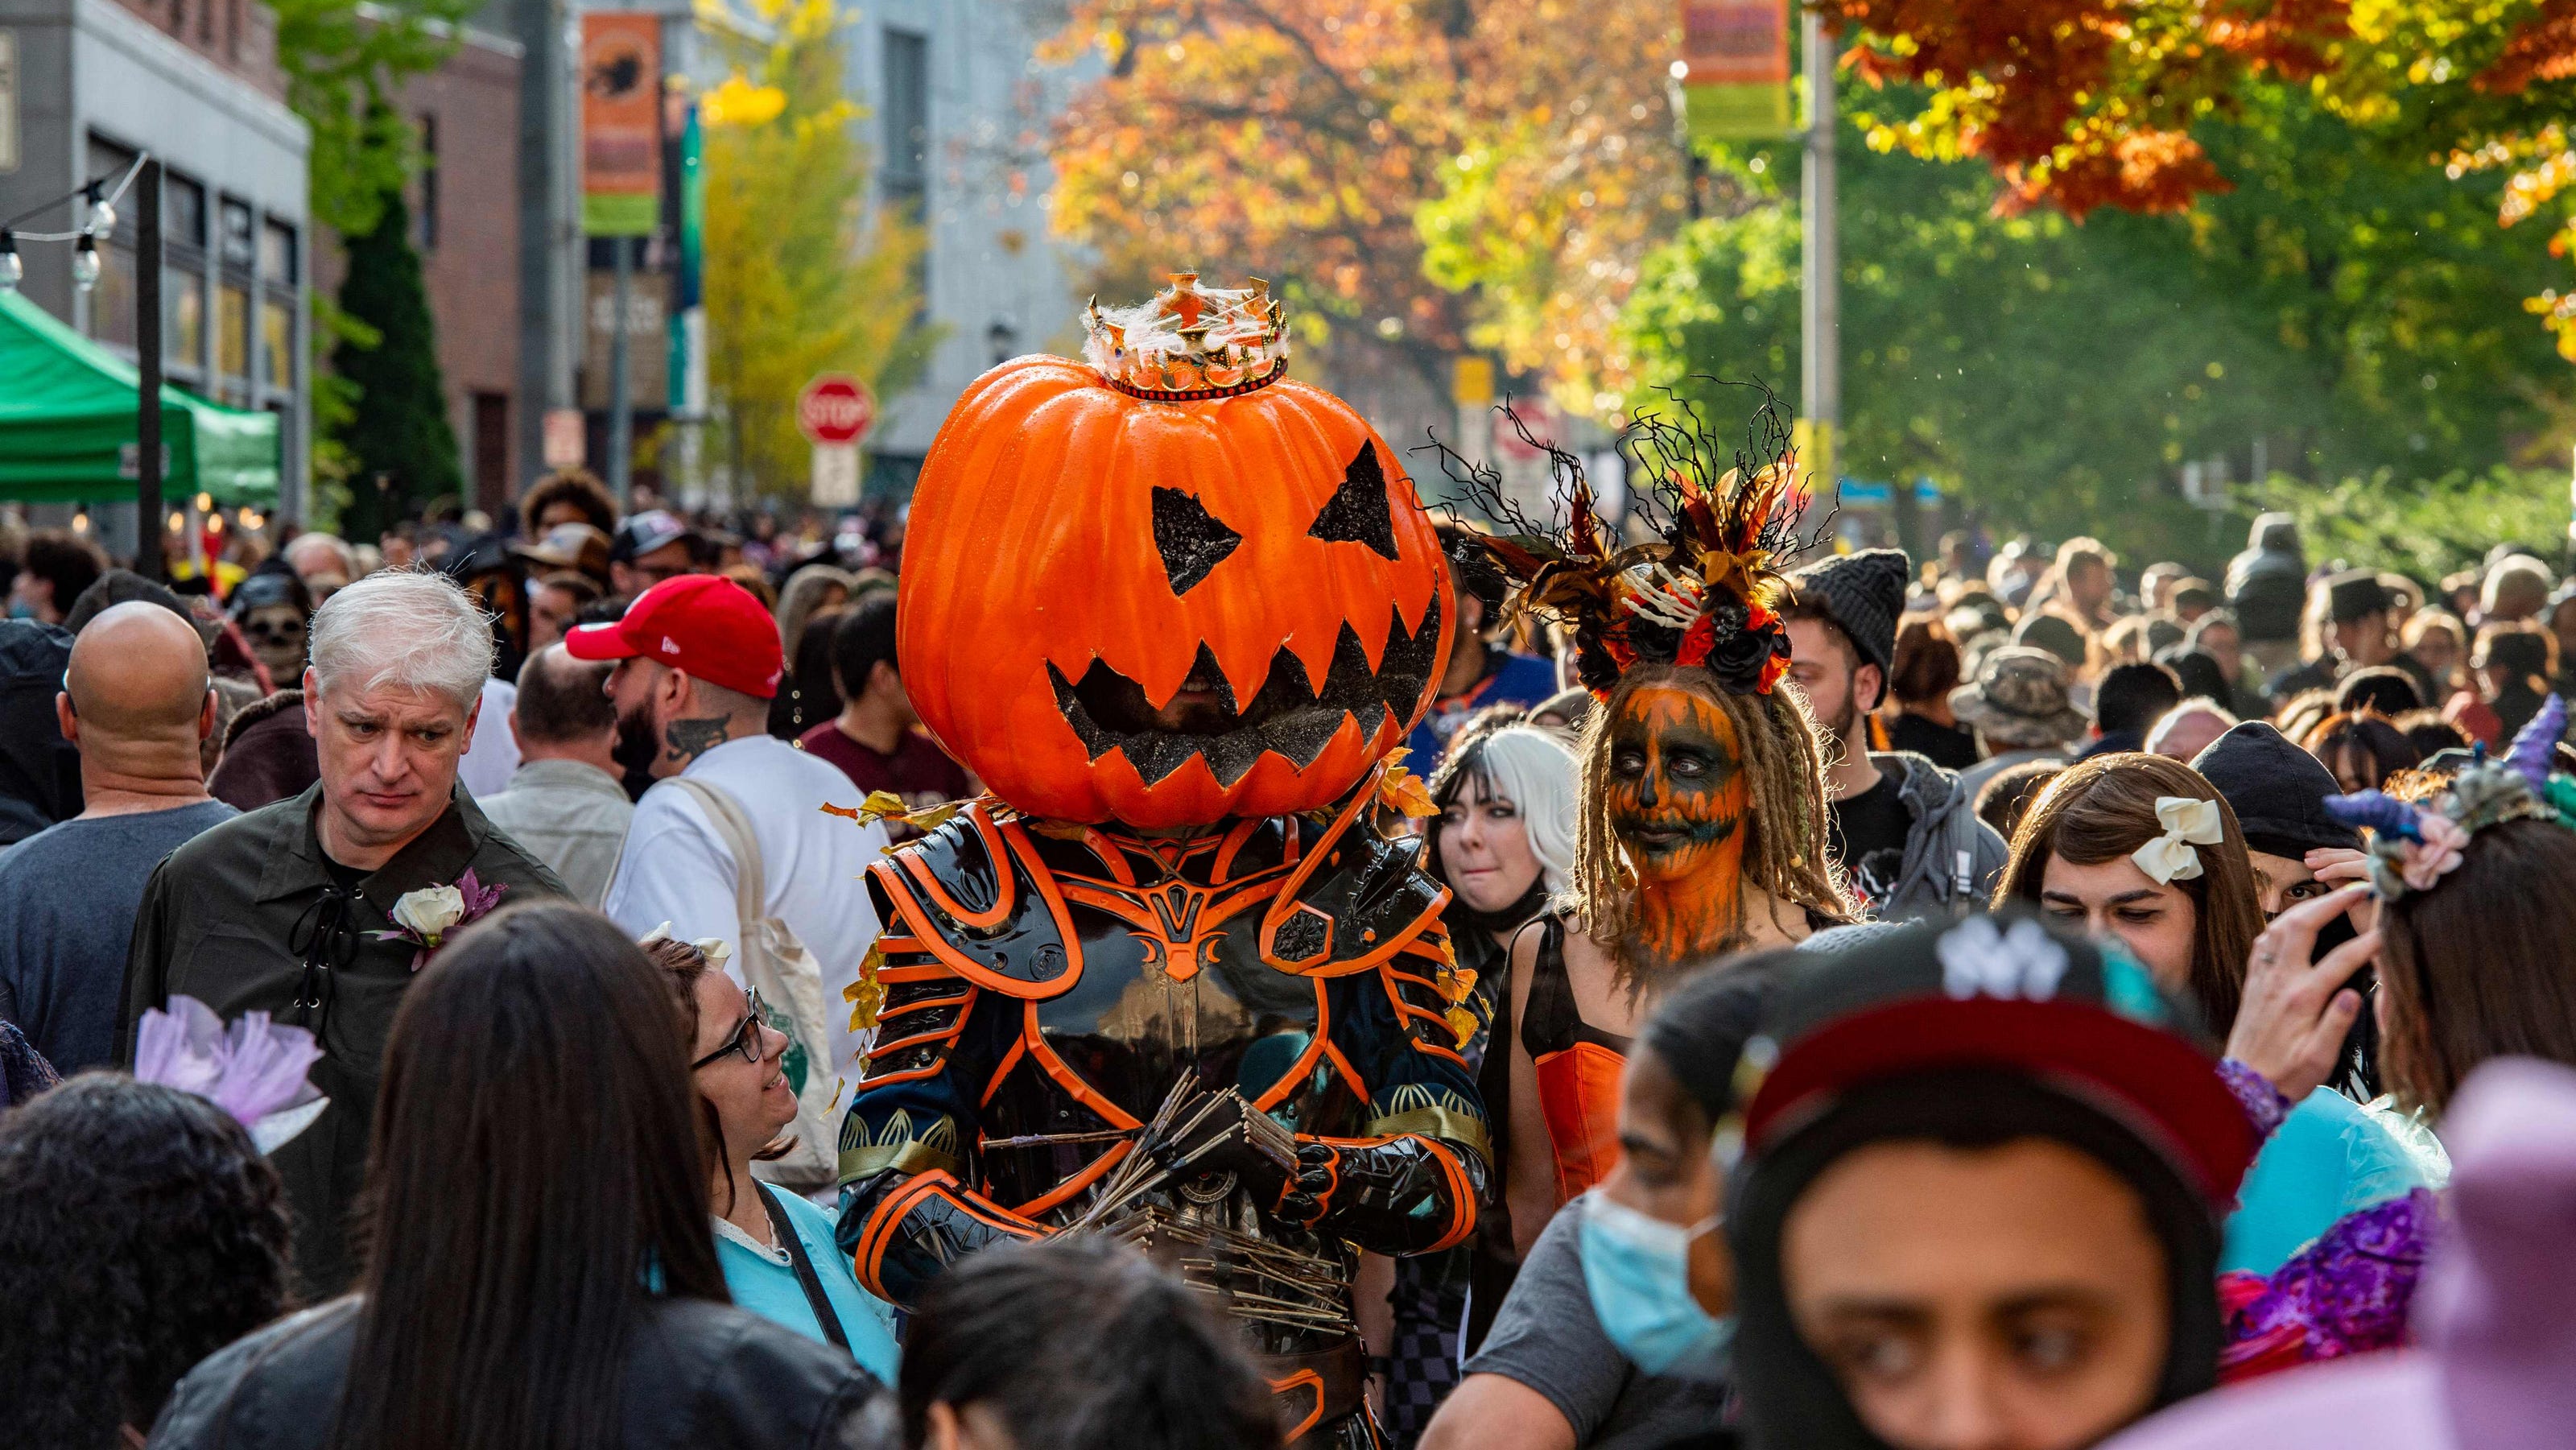 Most popular Halloween costumes of 2022, according to Google Trends